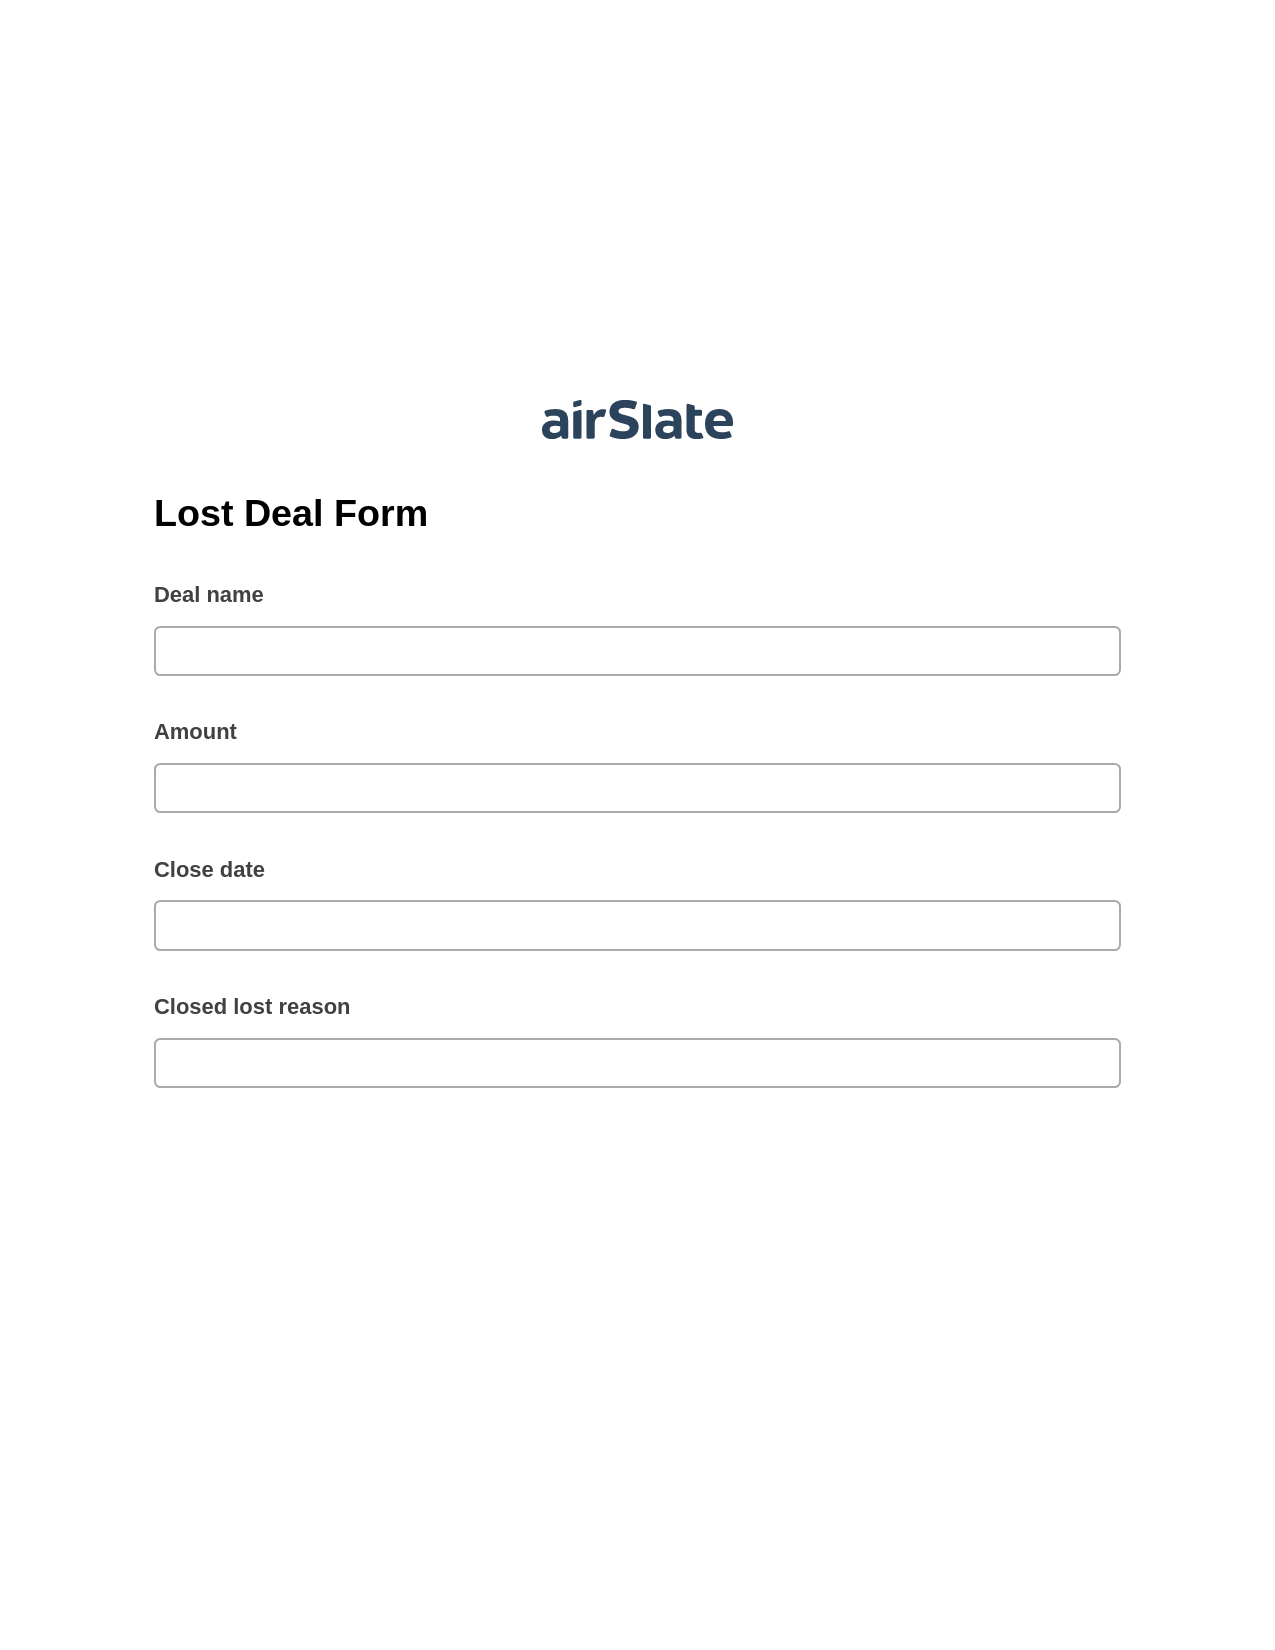 Lost Deal Form Prefill from NetSuite records, Slack Notification Bot, Archive to OneDrive Bot